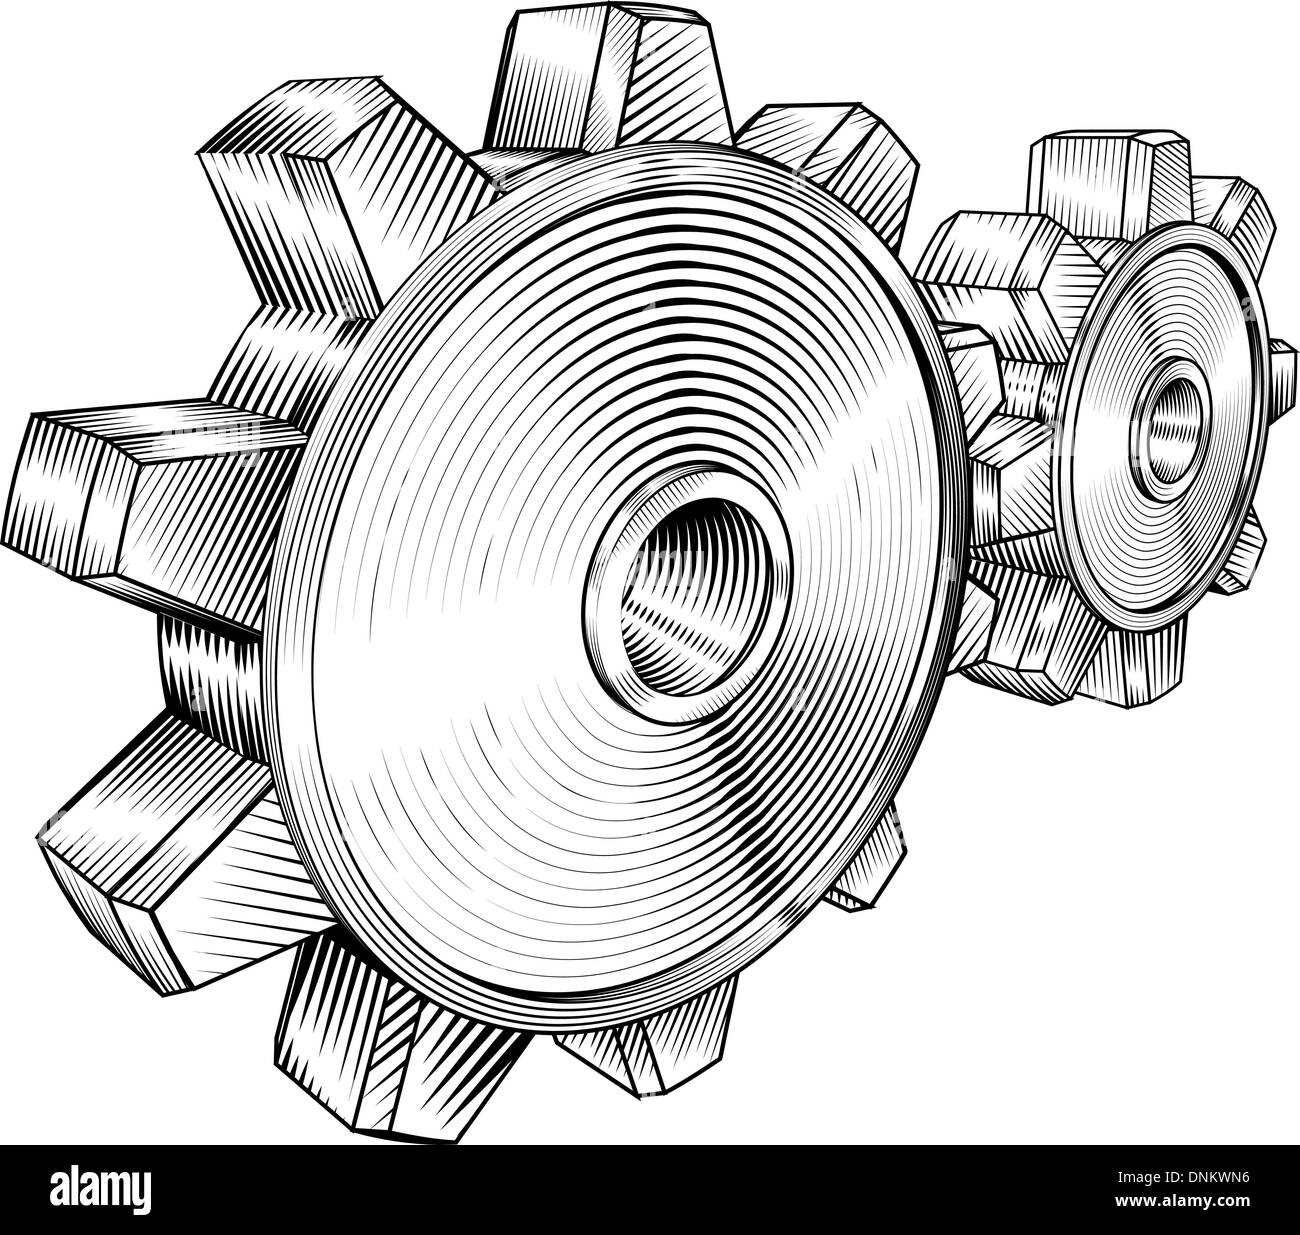 a black and white illustration of interlocking cogs Stock Vector